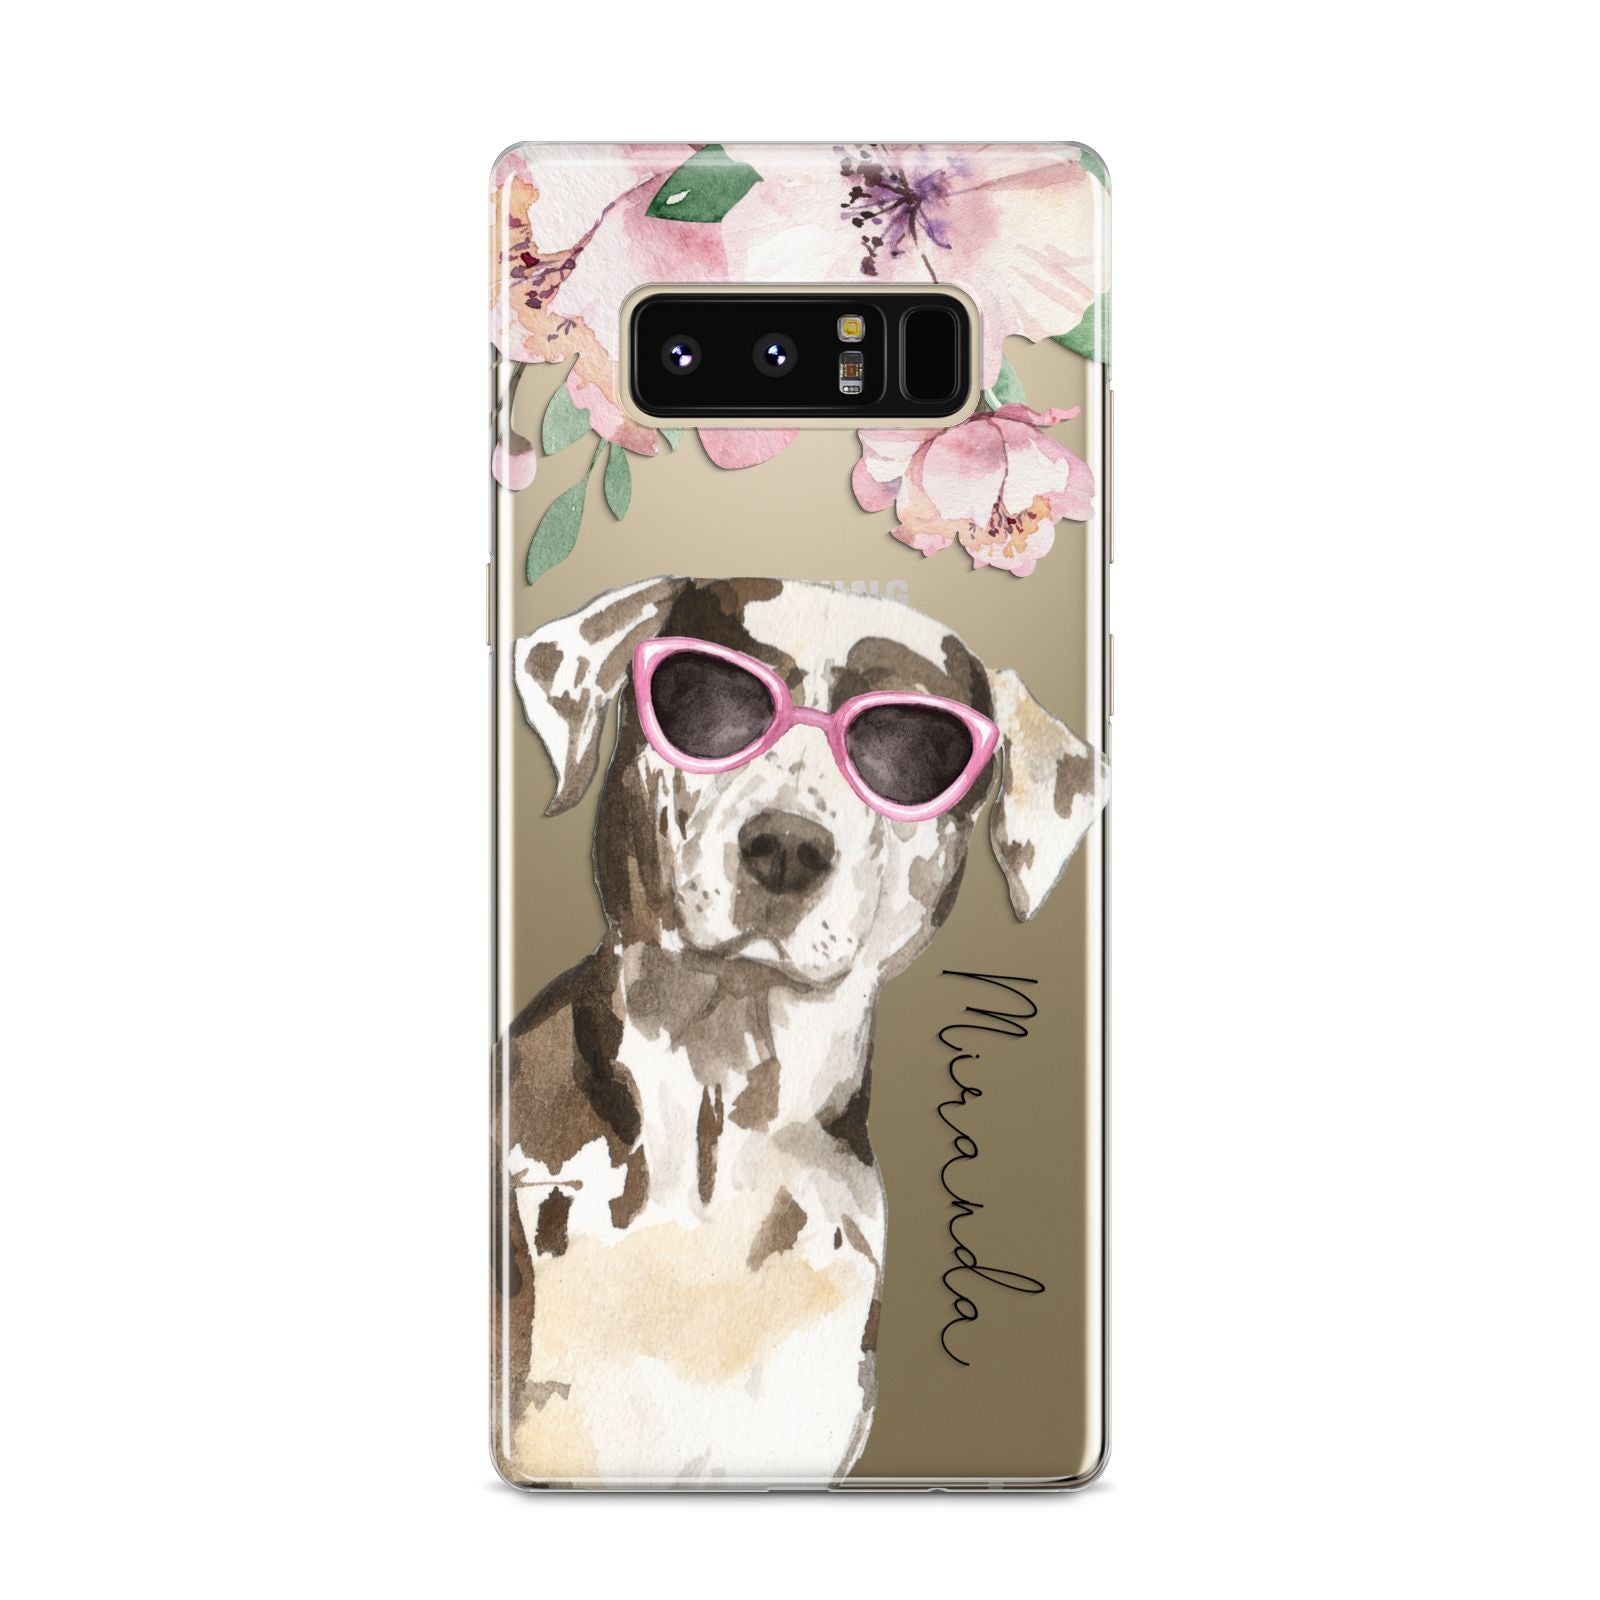 Personalised Catahoula Leopard Dog Samsung Galaxy S8 Case